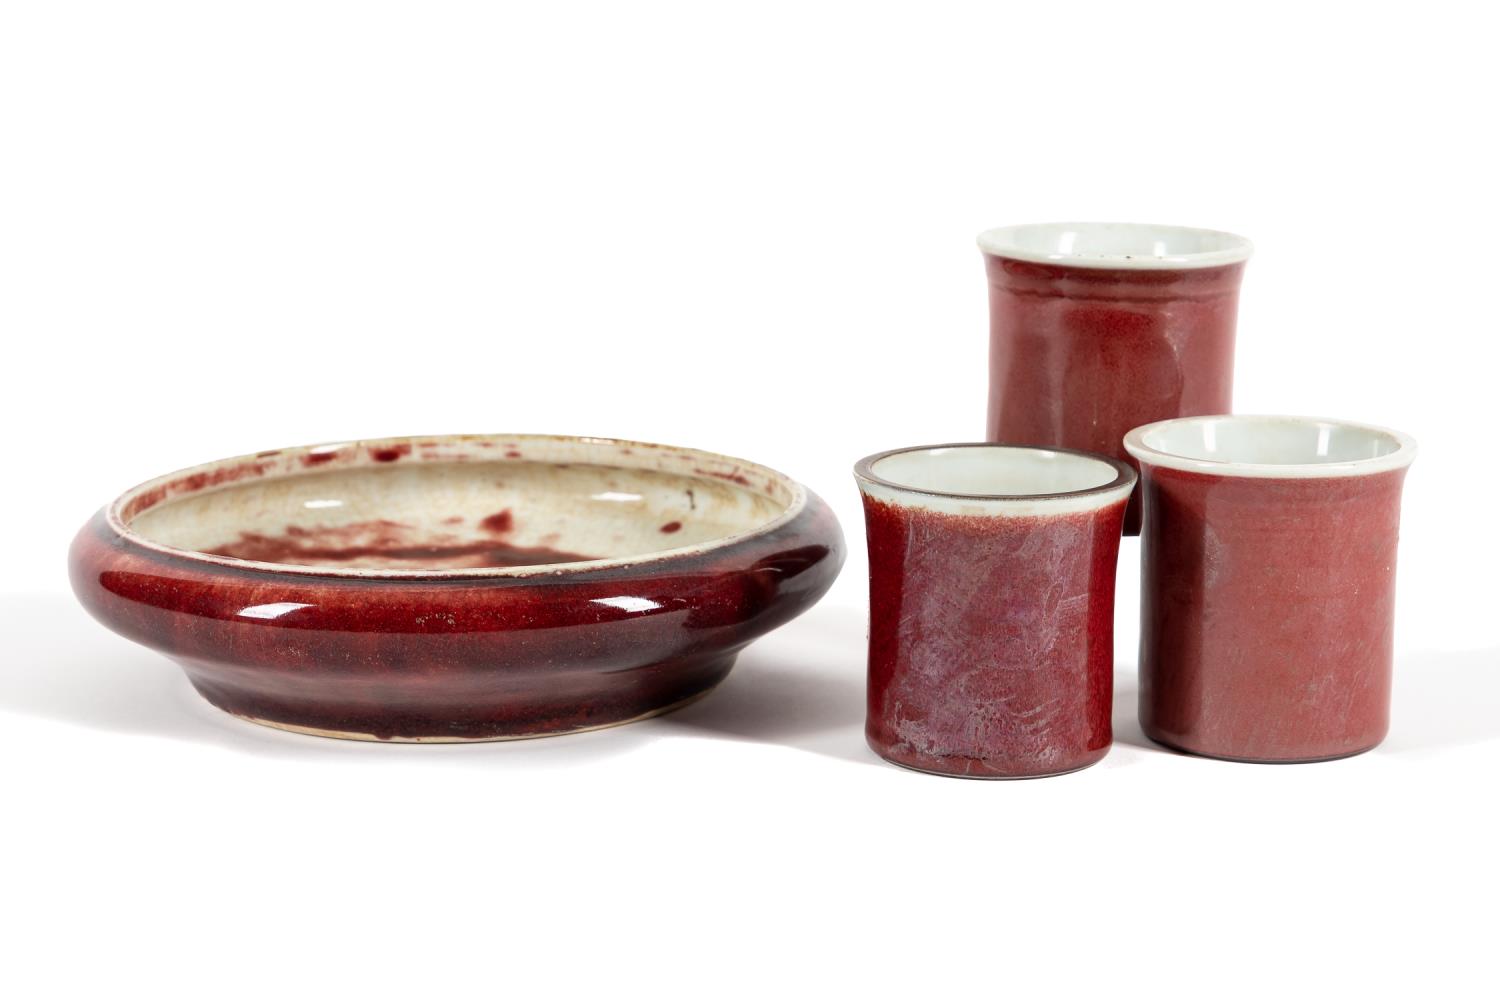 FOUR PIECES, CHINESE OXBLOOD PORCELAIN